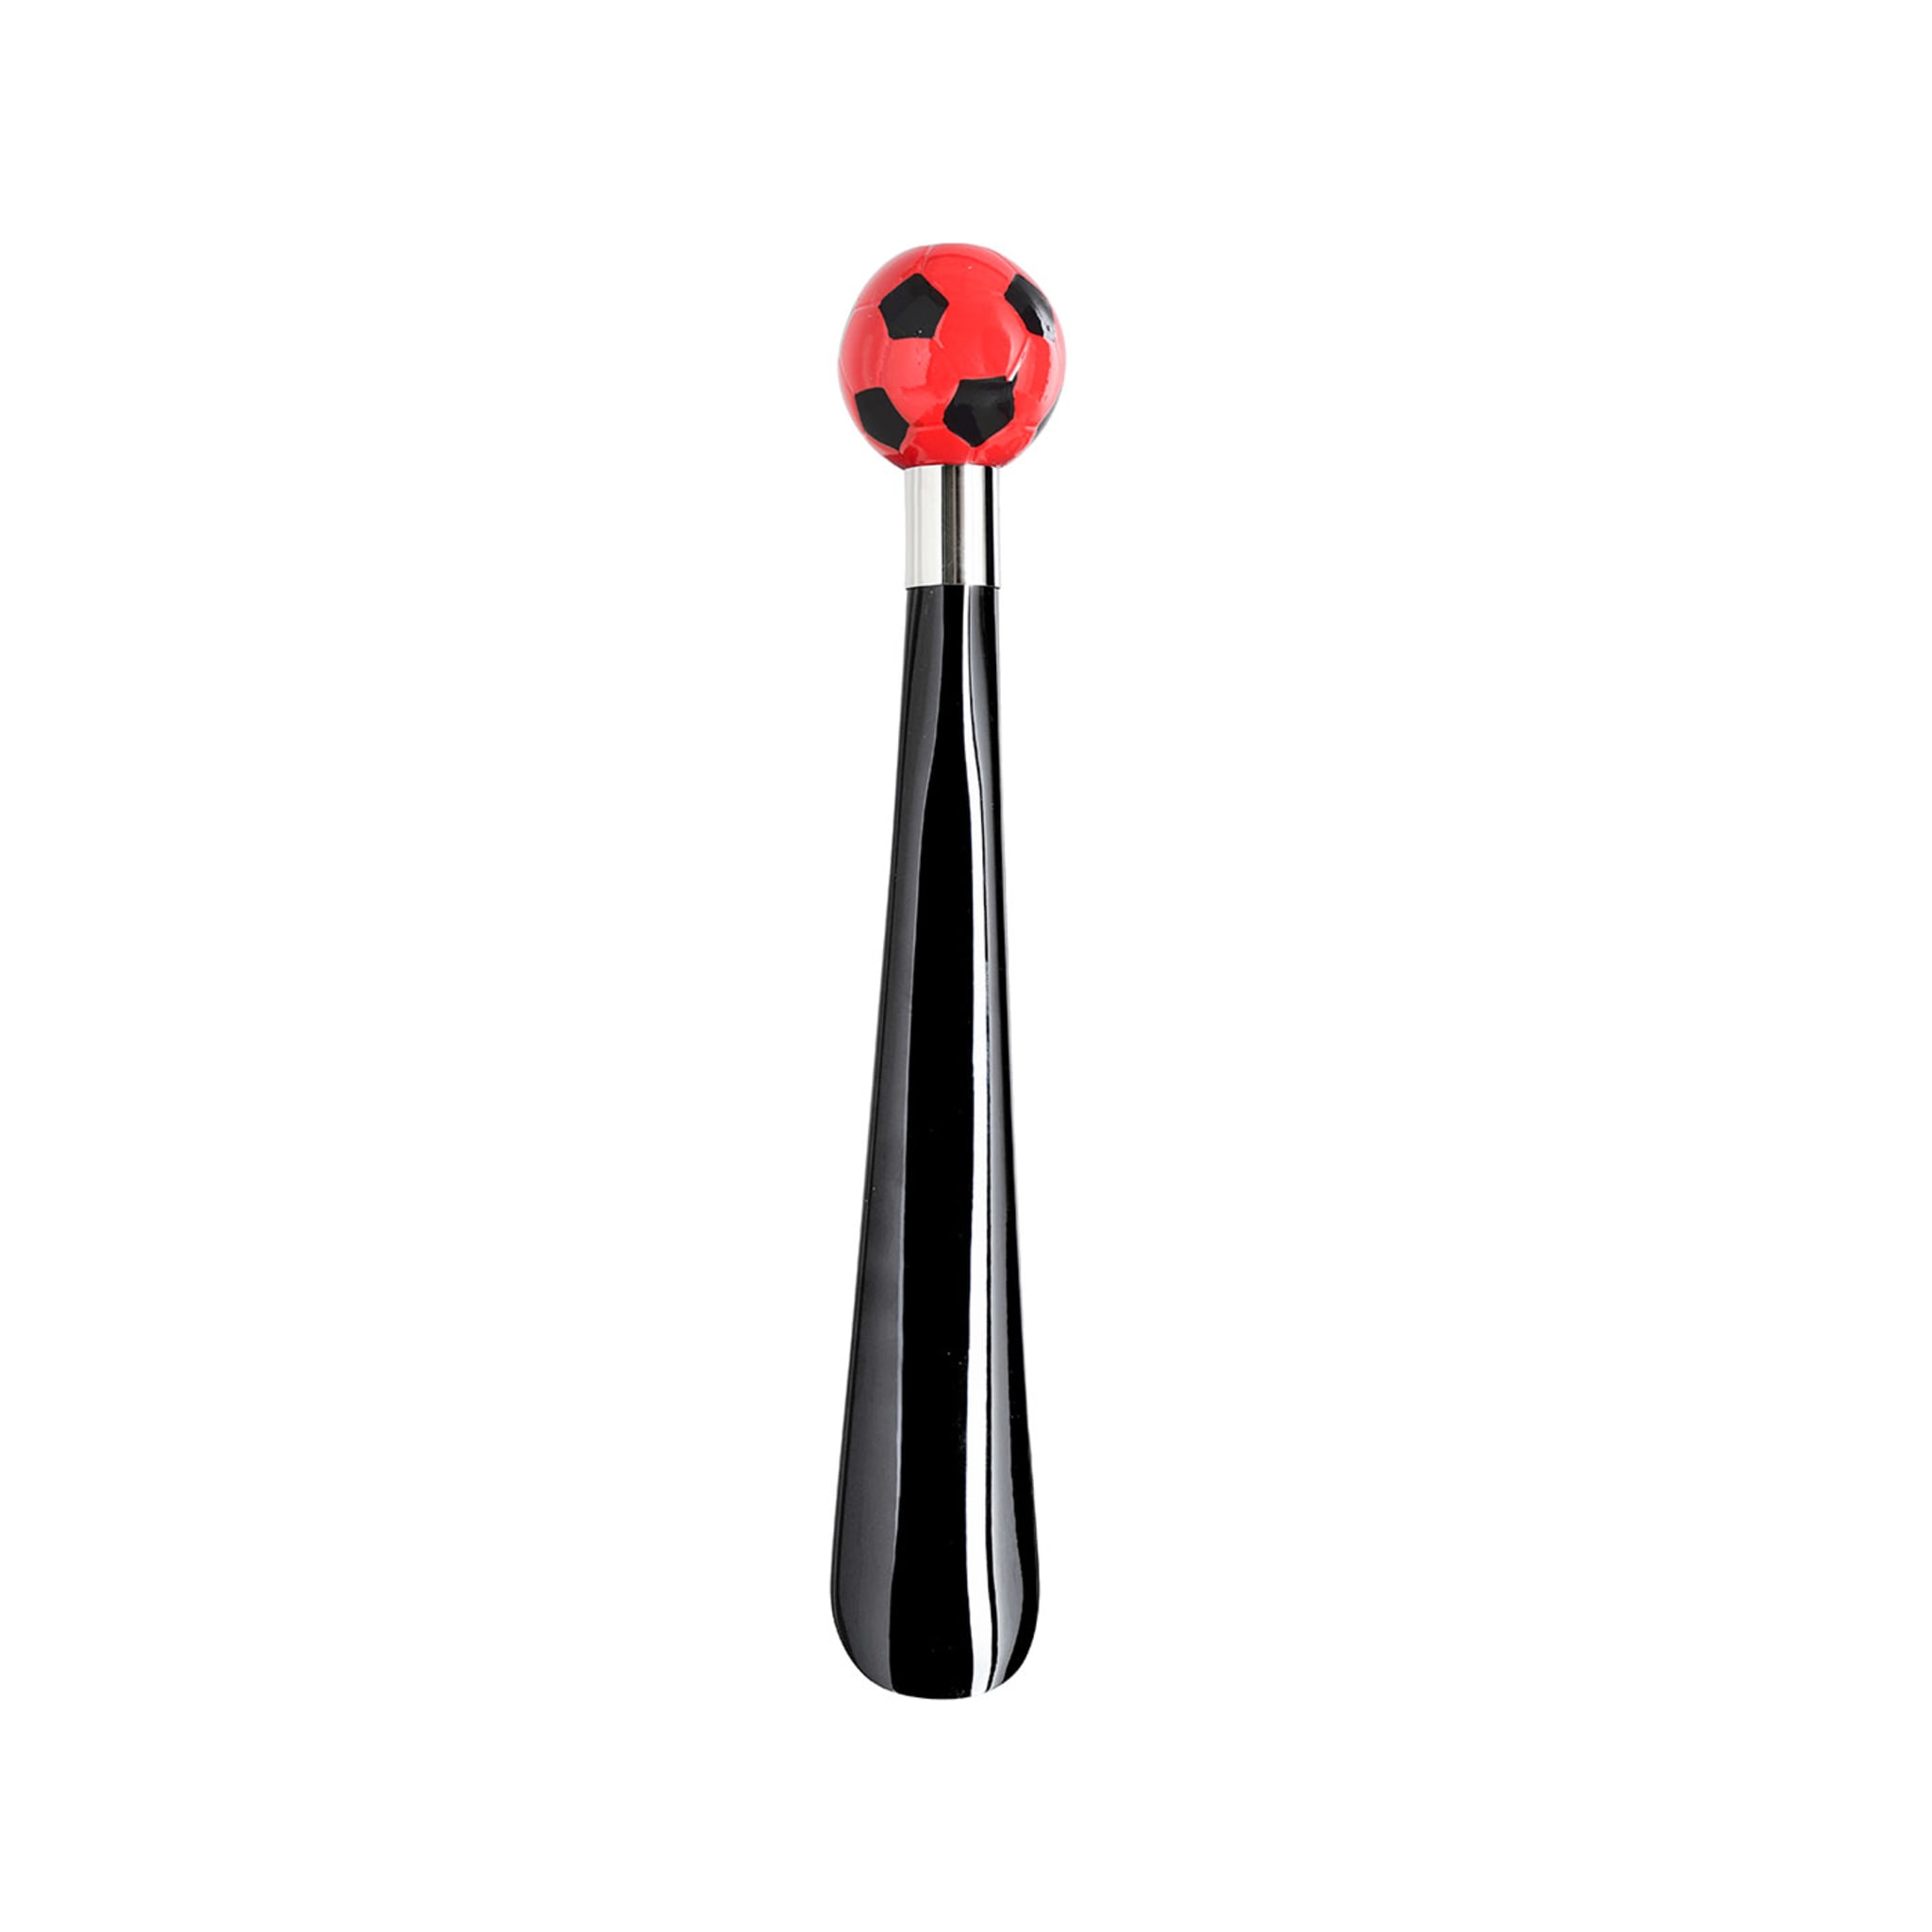 Calcio Small Black & Red Decorated Shoehorn - Alternative view 2